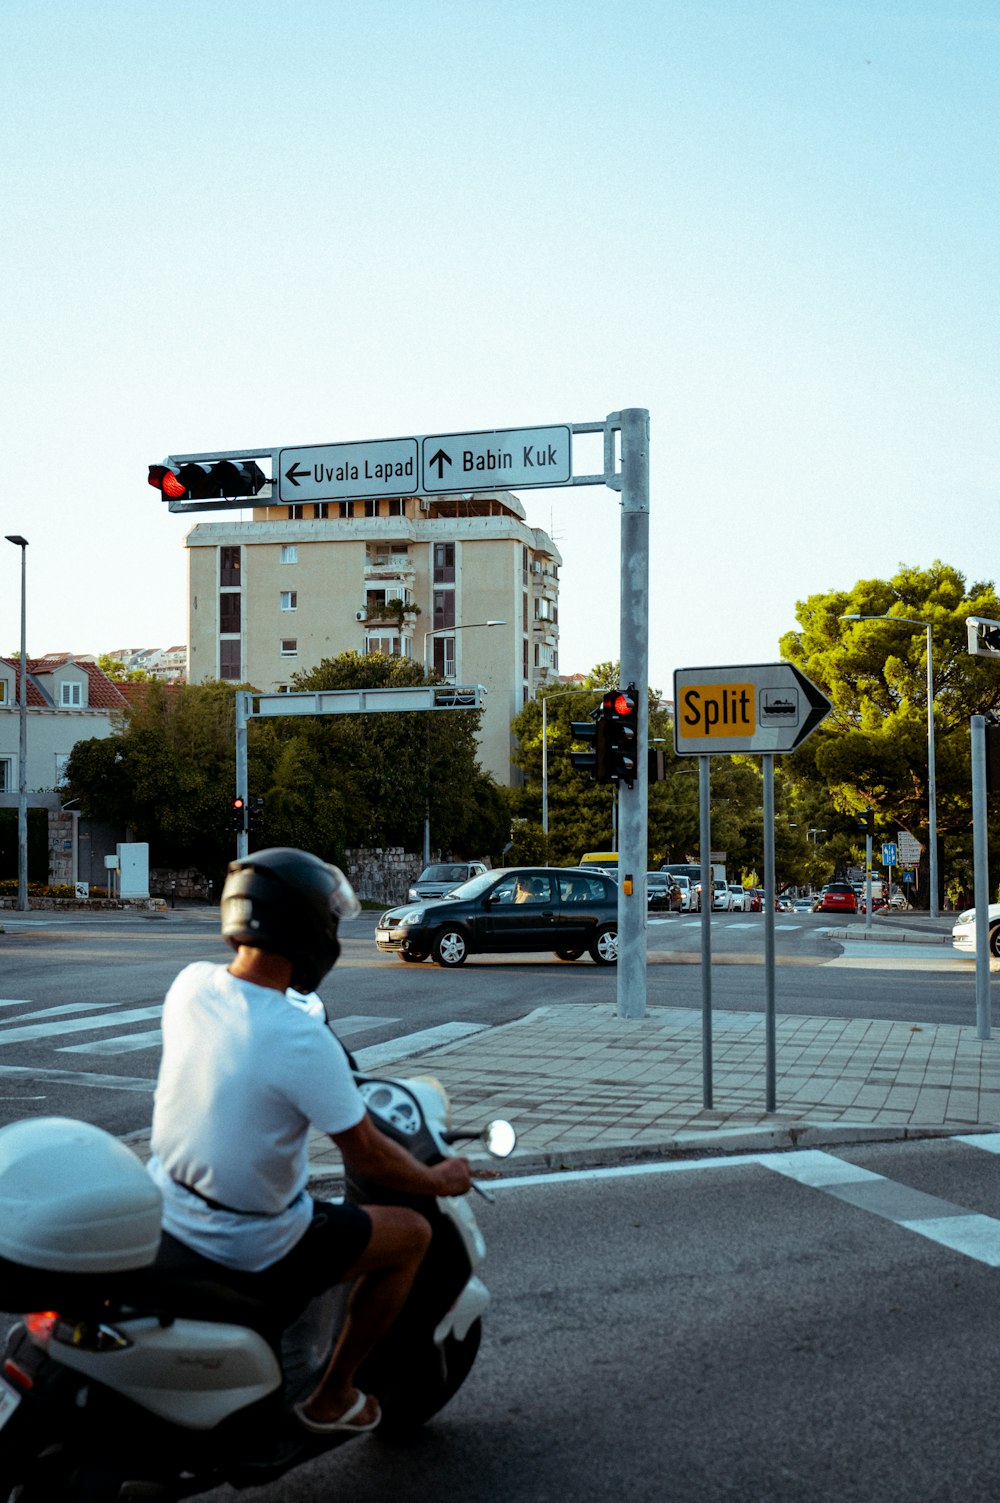 a man riding a motorcycle down a street next to a traffic light